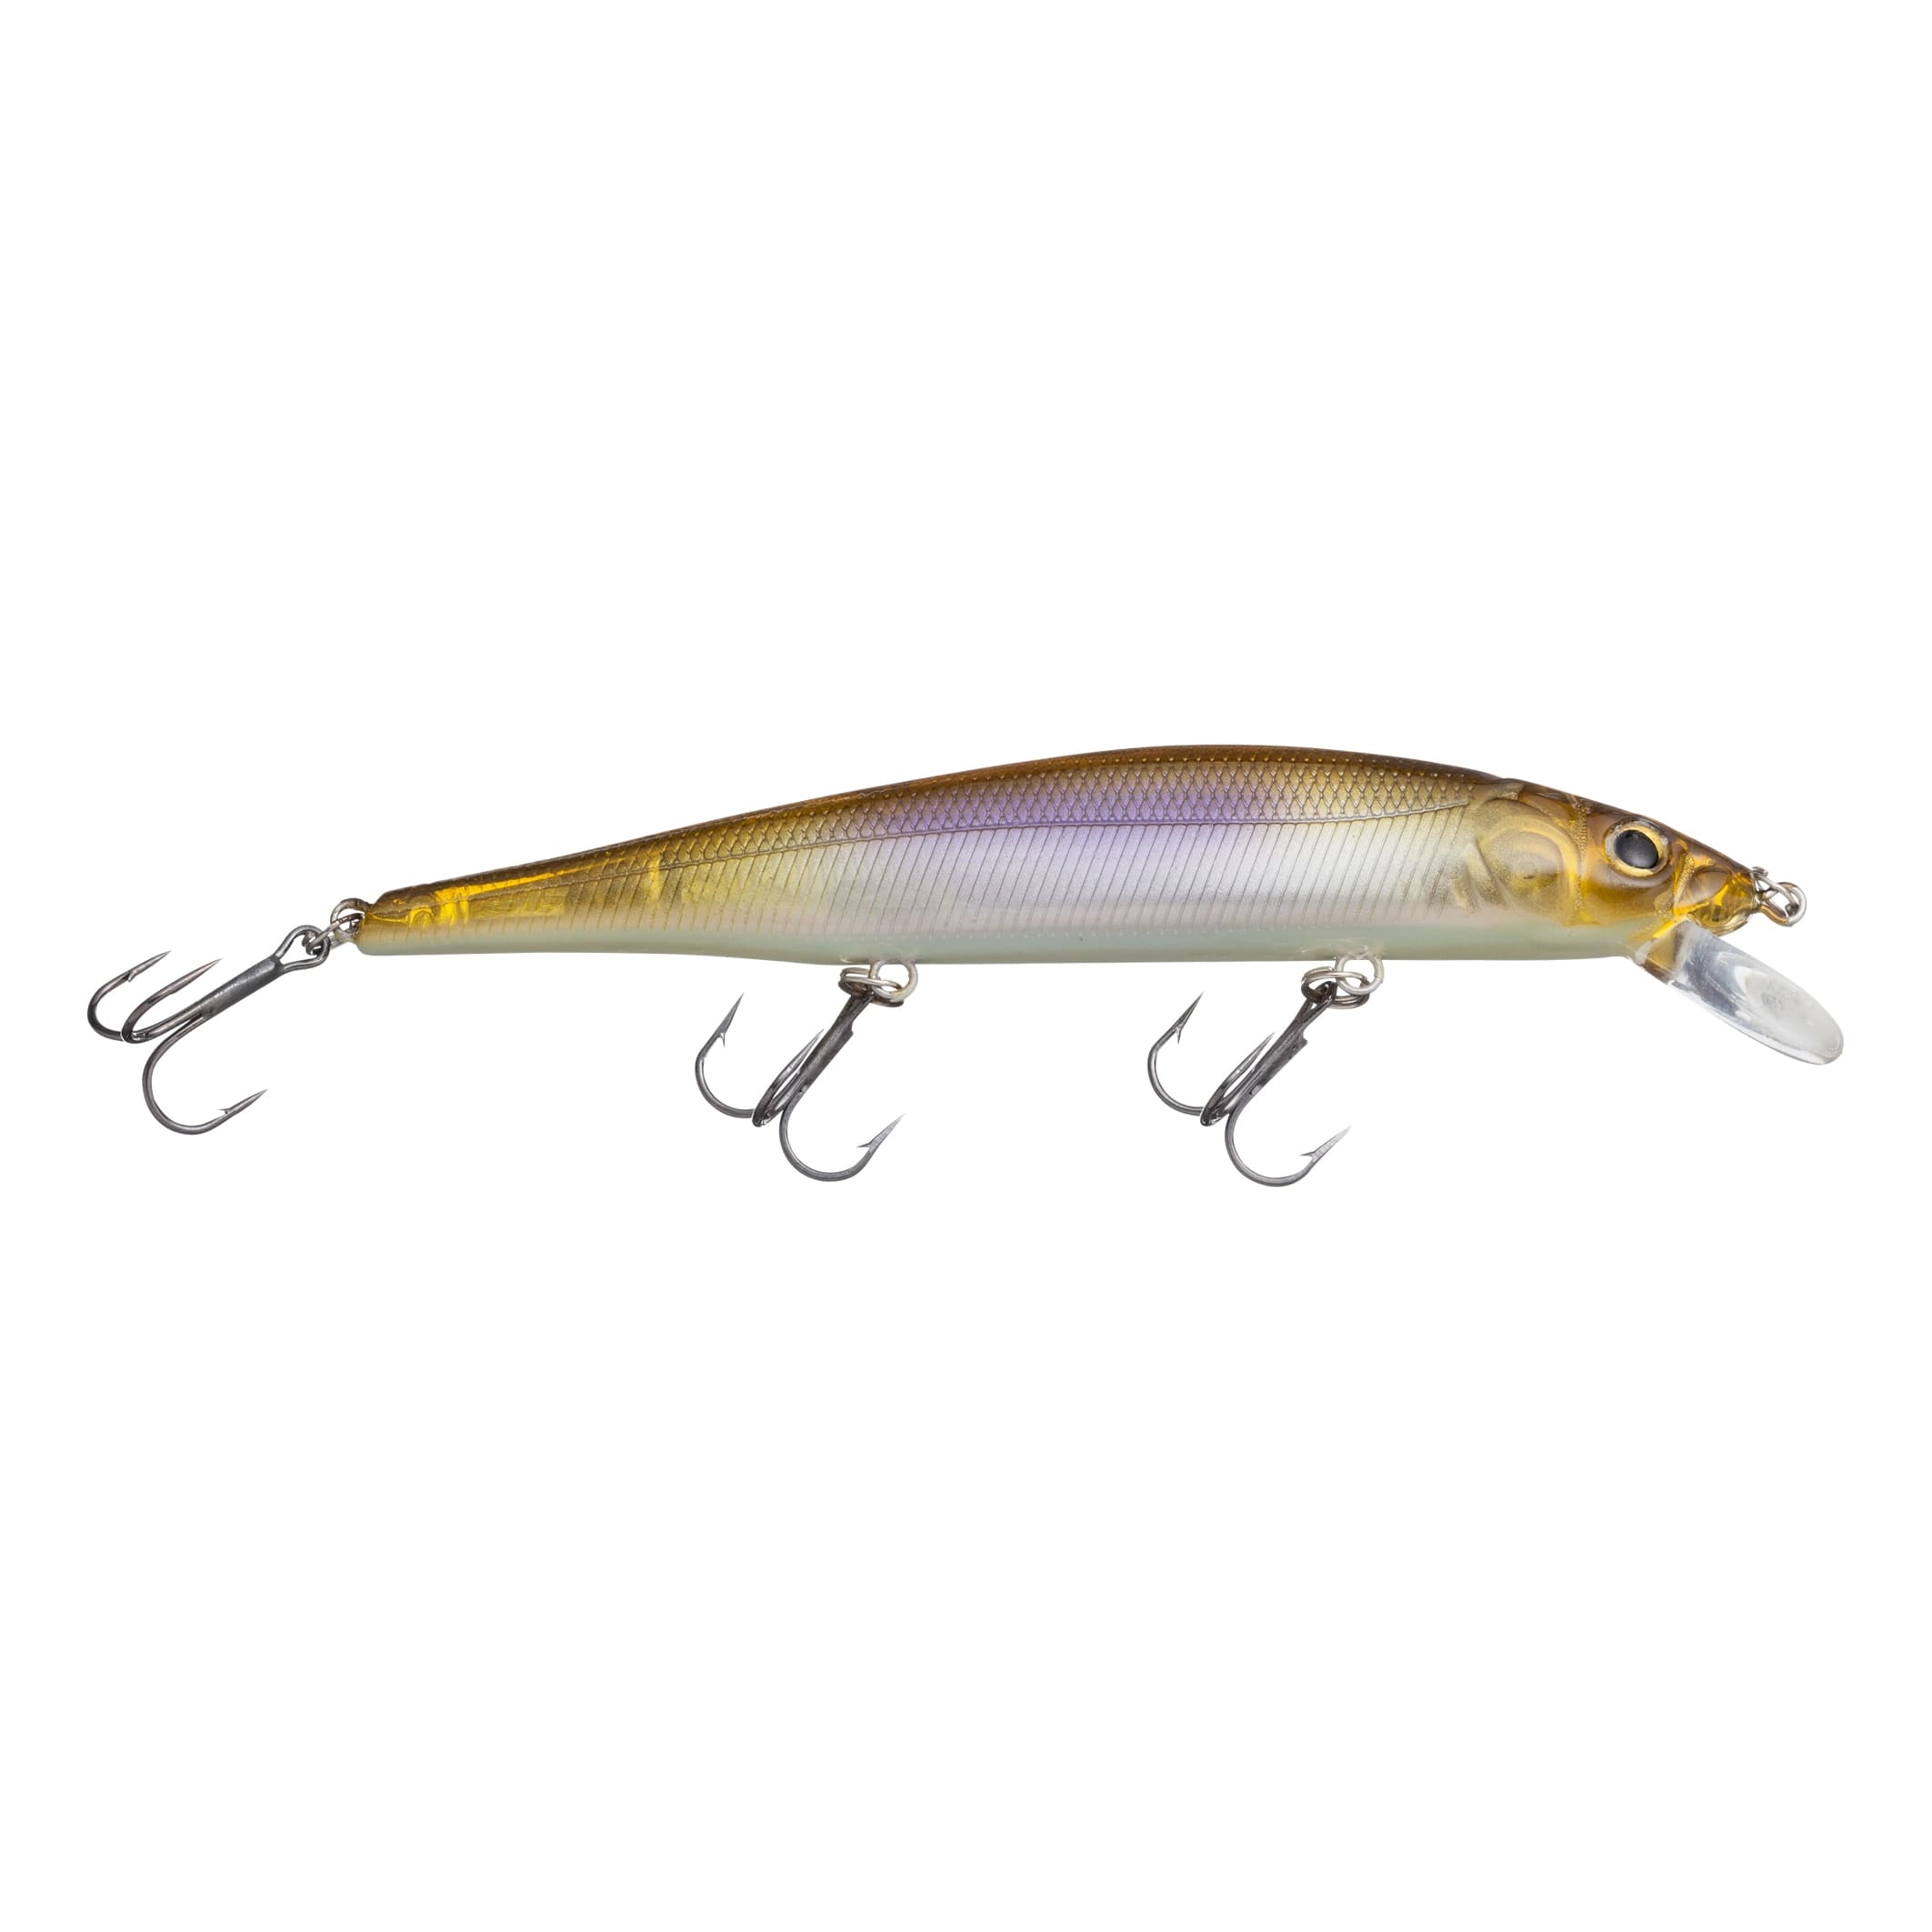 Cotton Cordell Ripplin' Red Fin Jerkbait- Lake Erie Bait and Tackle